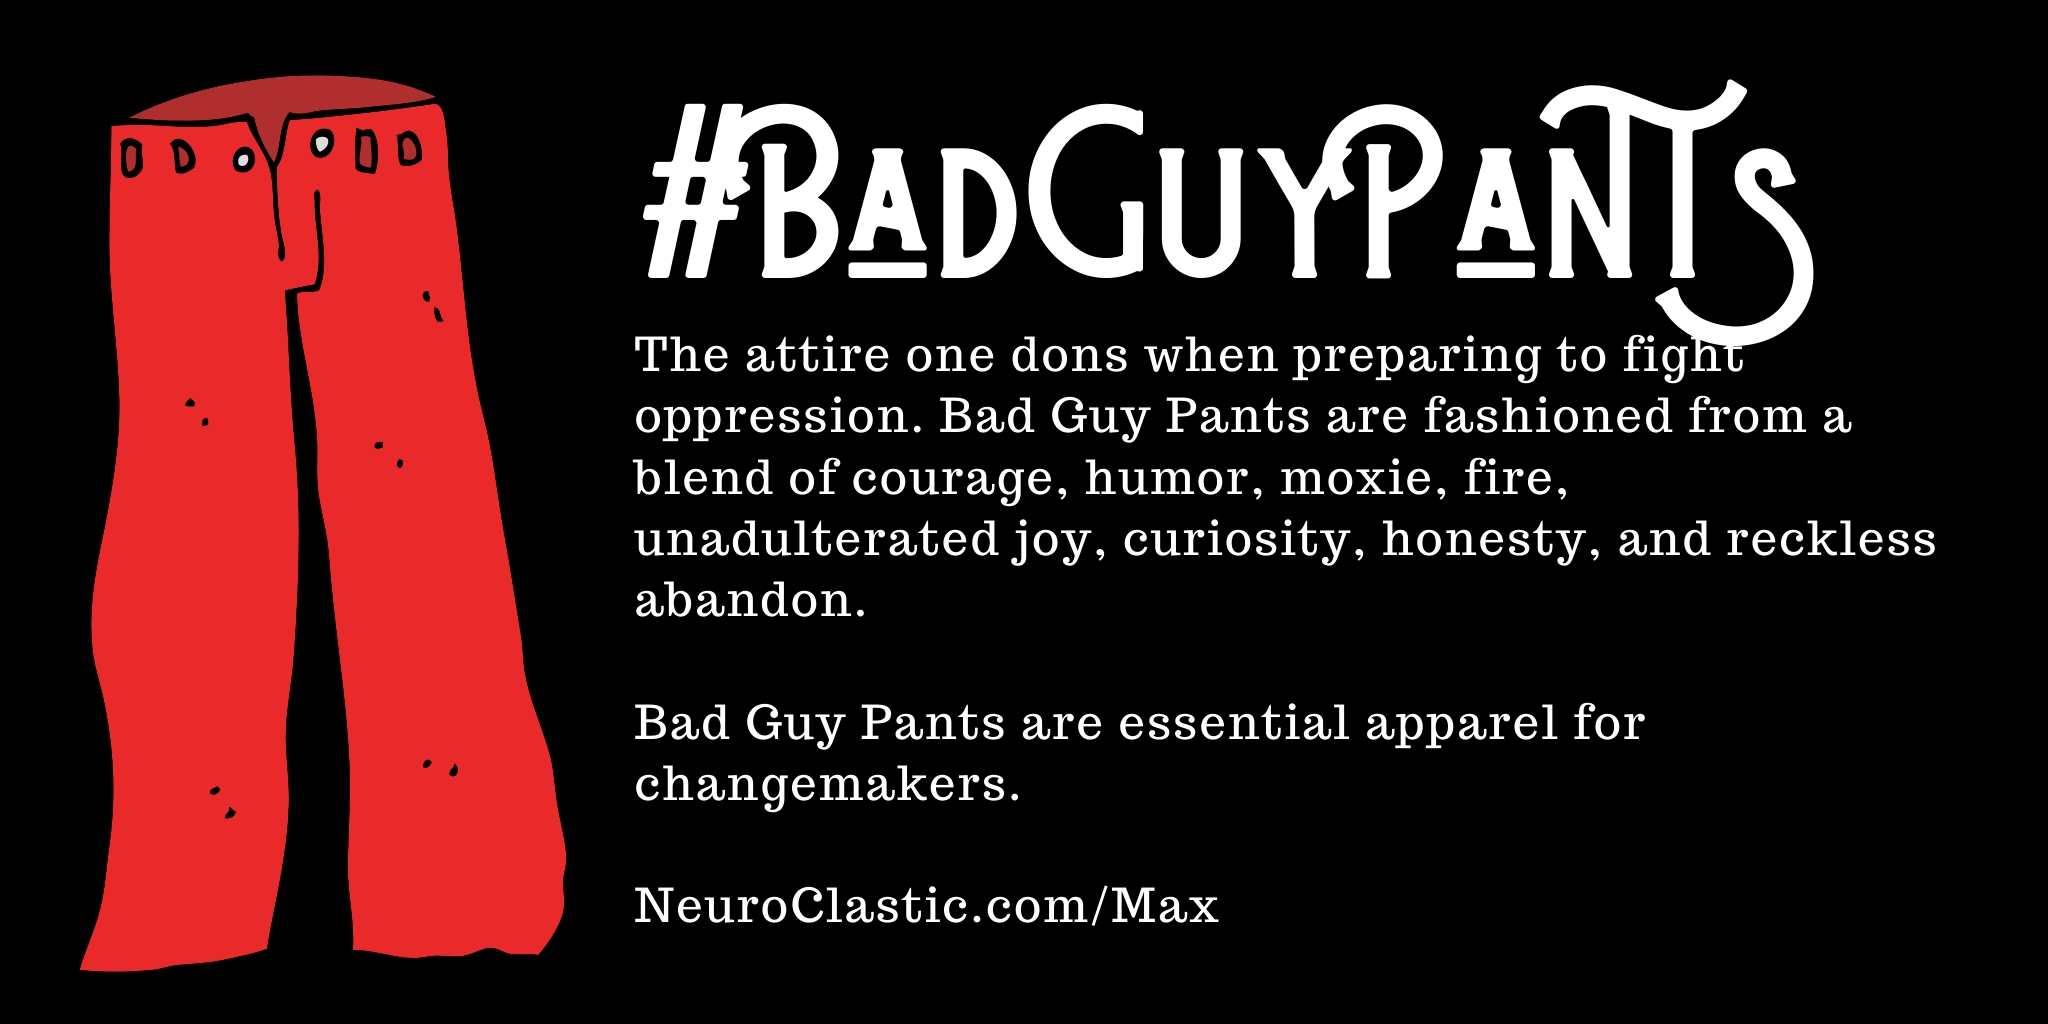 Bad Guy Pants image reads #BadGuyPants the attire one dons when preparing to fight oppression. Bad Guy Pants are fashioned from a blend of courage, humor, moxie, fie, unadulterated joy, curiosity, honesty, and reckless abandon.